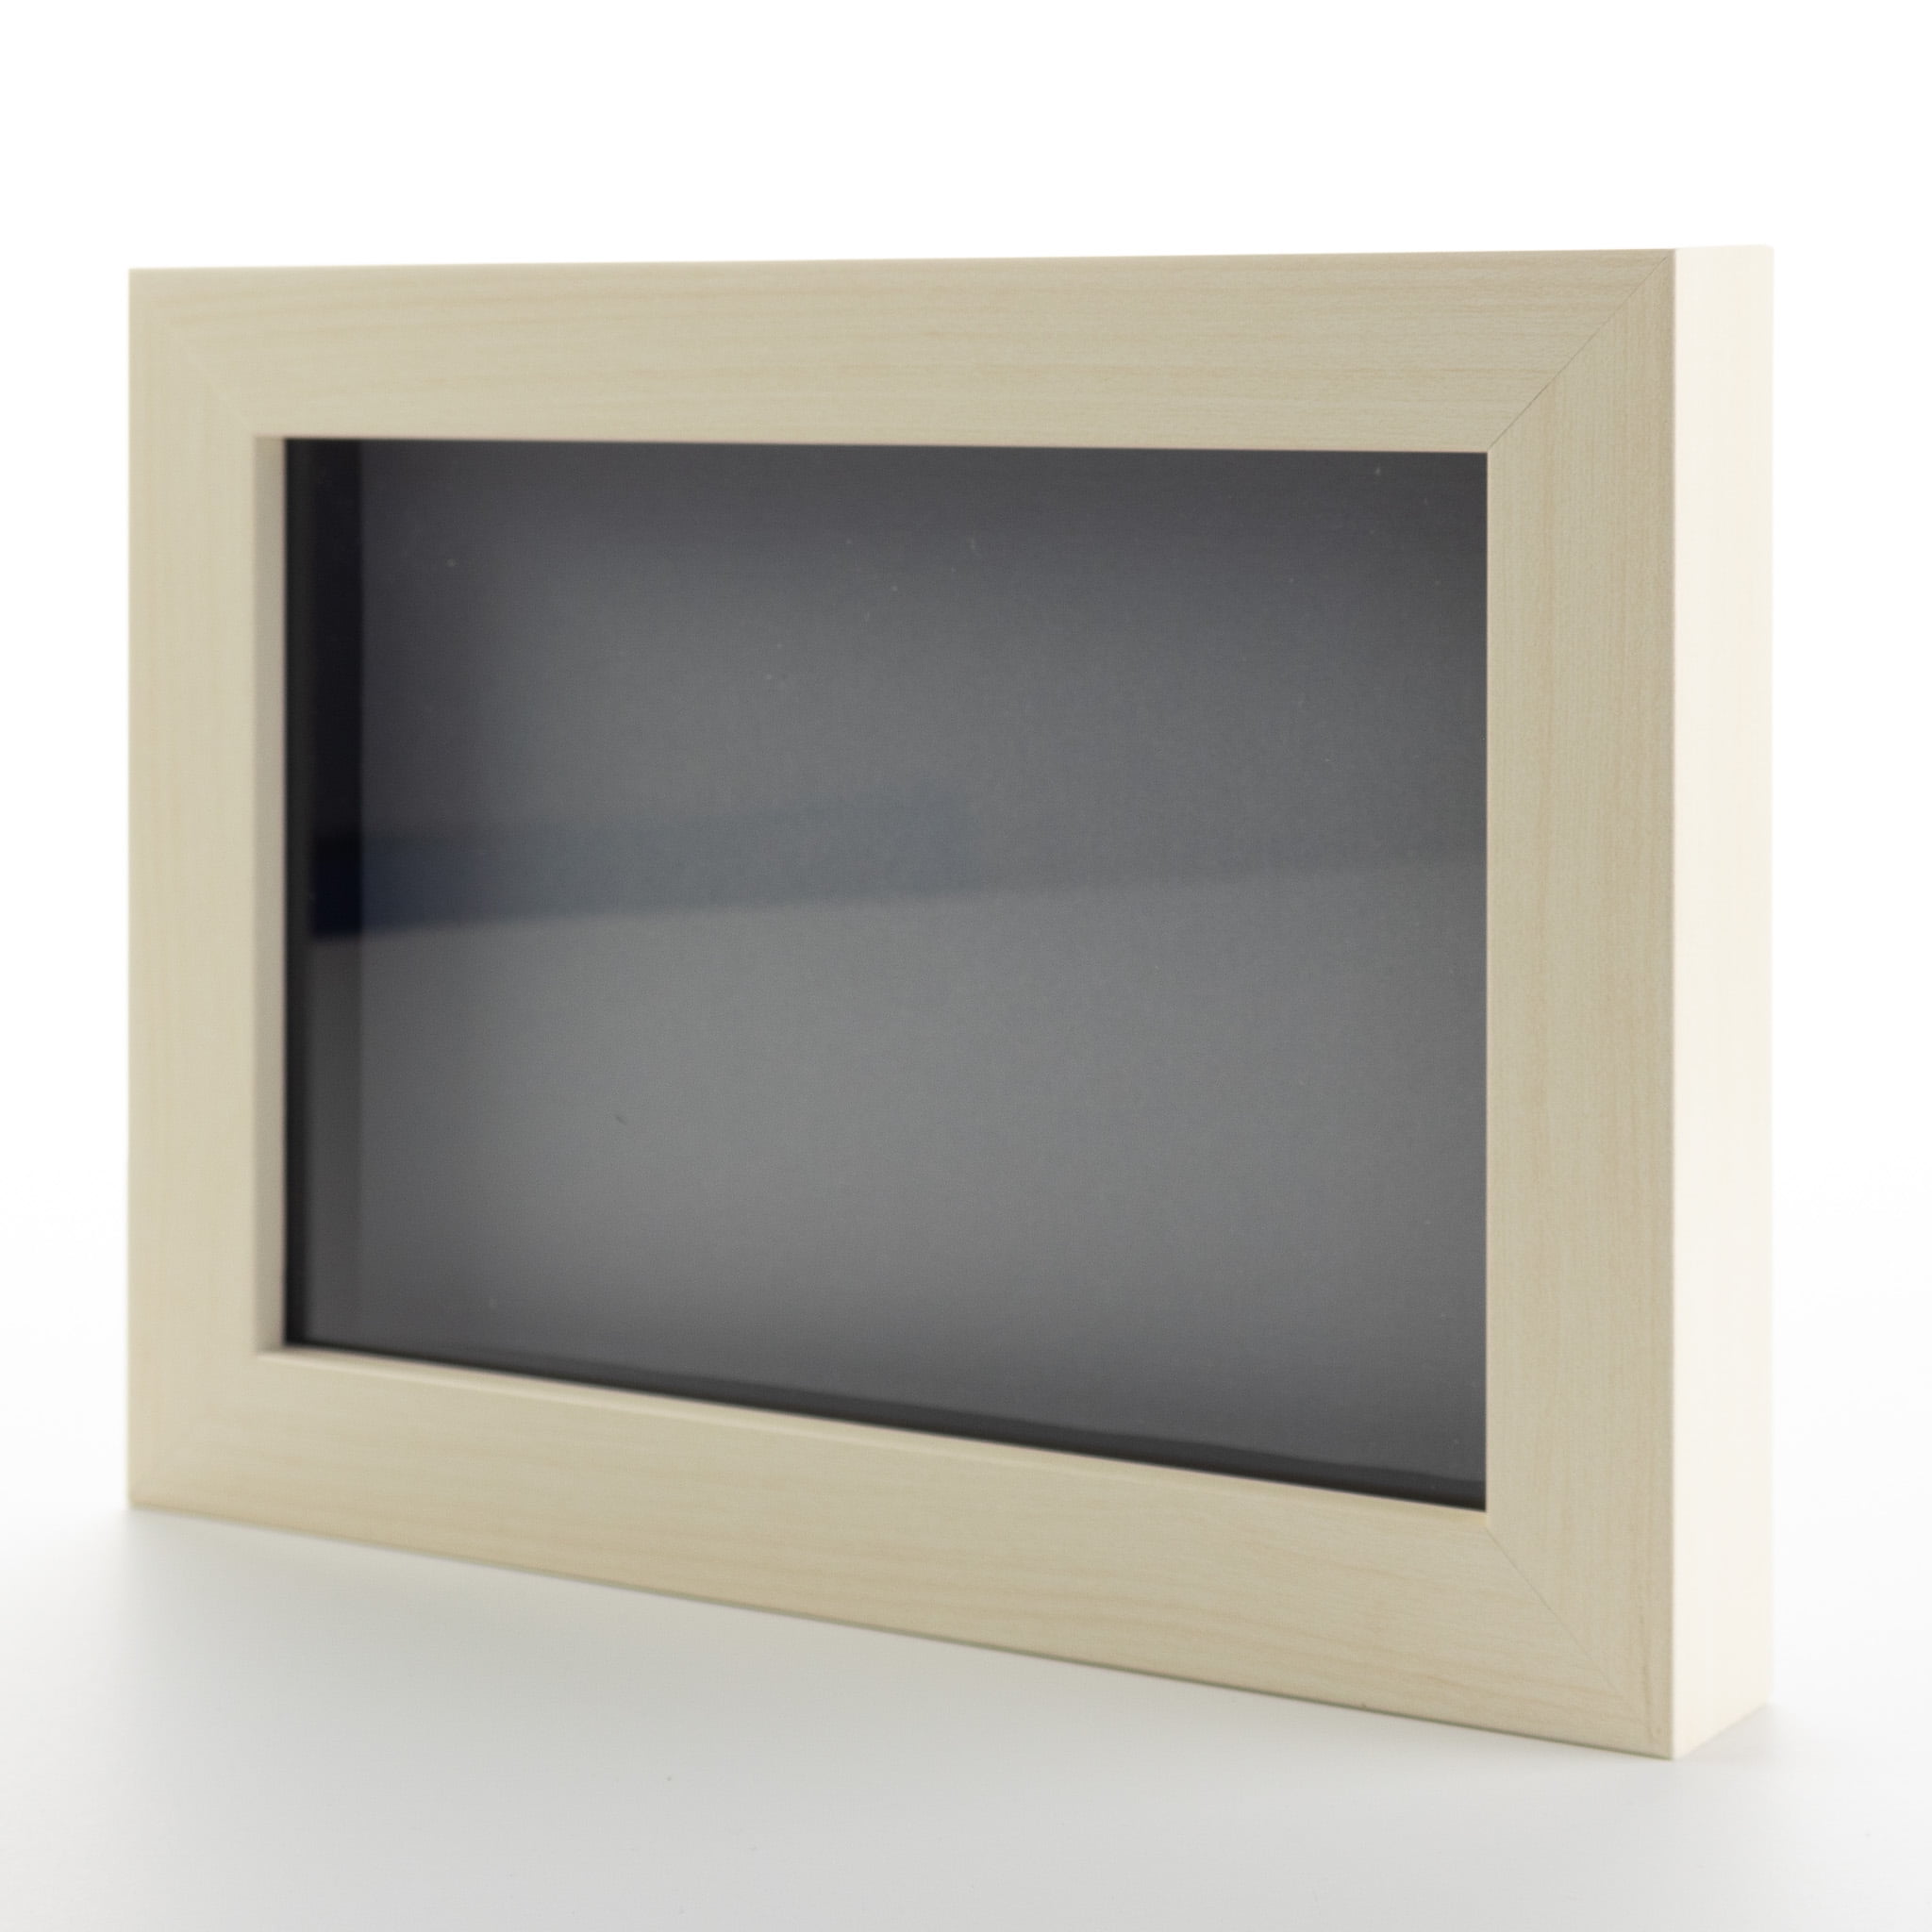 8x8 Shadow Box Frame Farm Blue Real Wood with a Gold Acid-Free Backing, 13/16 of Usuable Depth